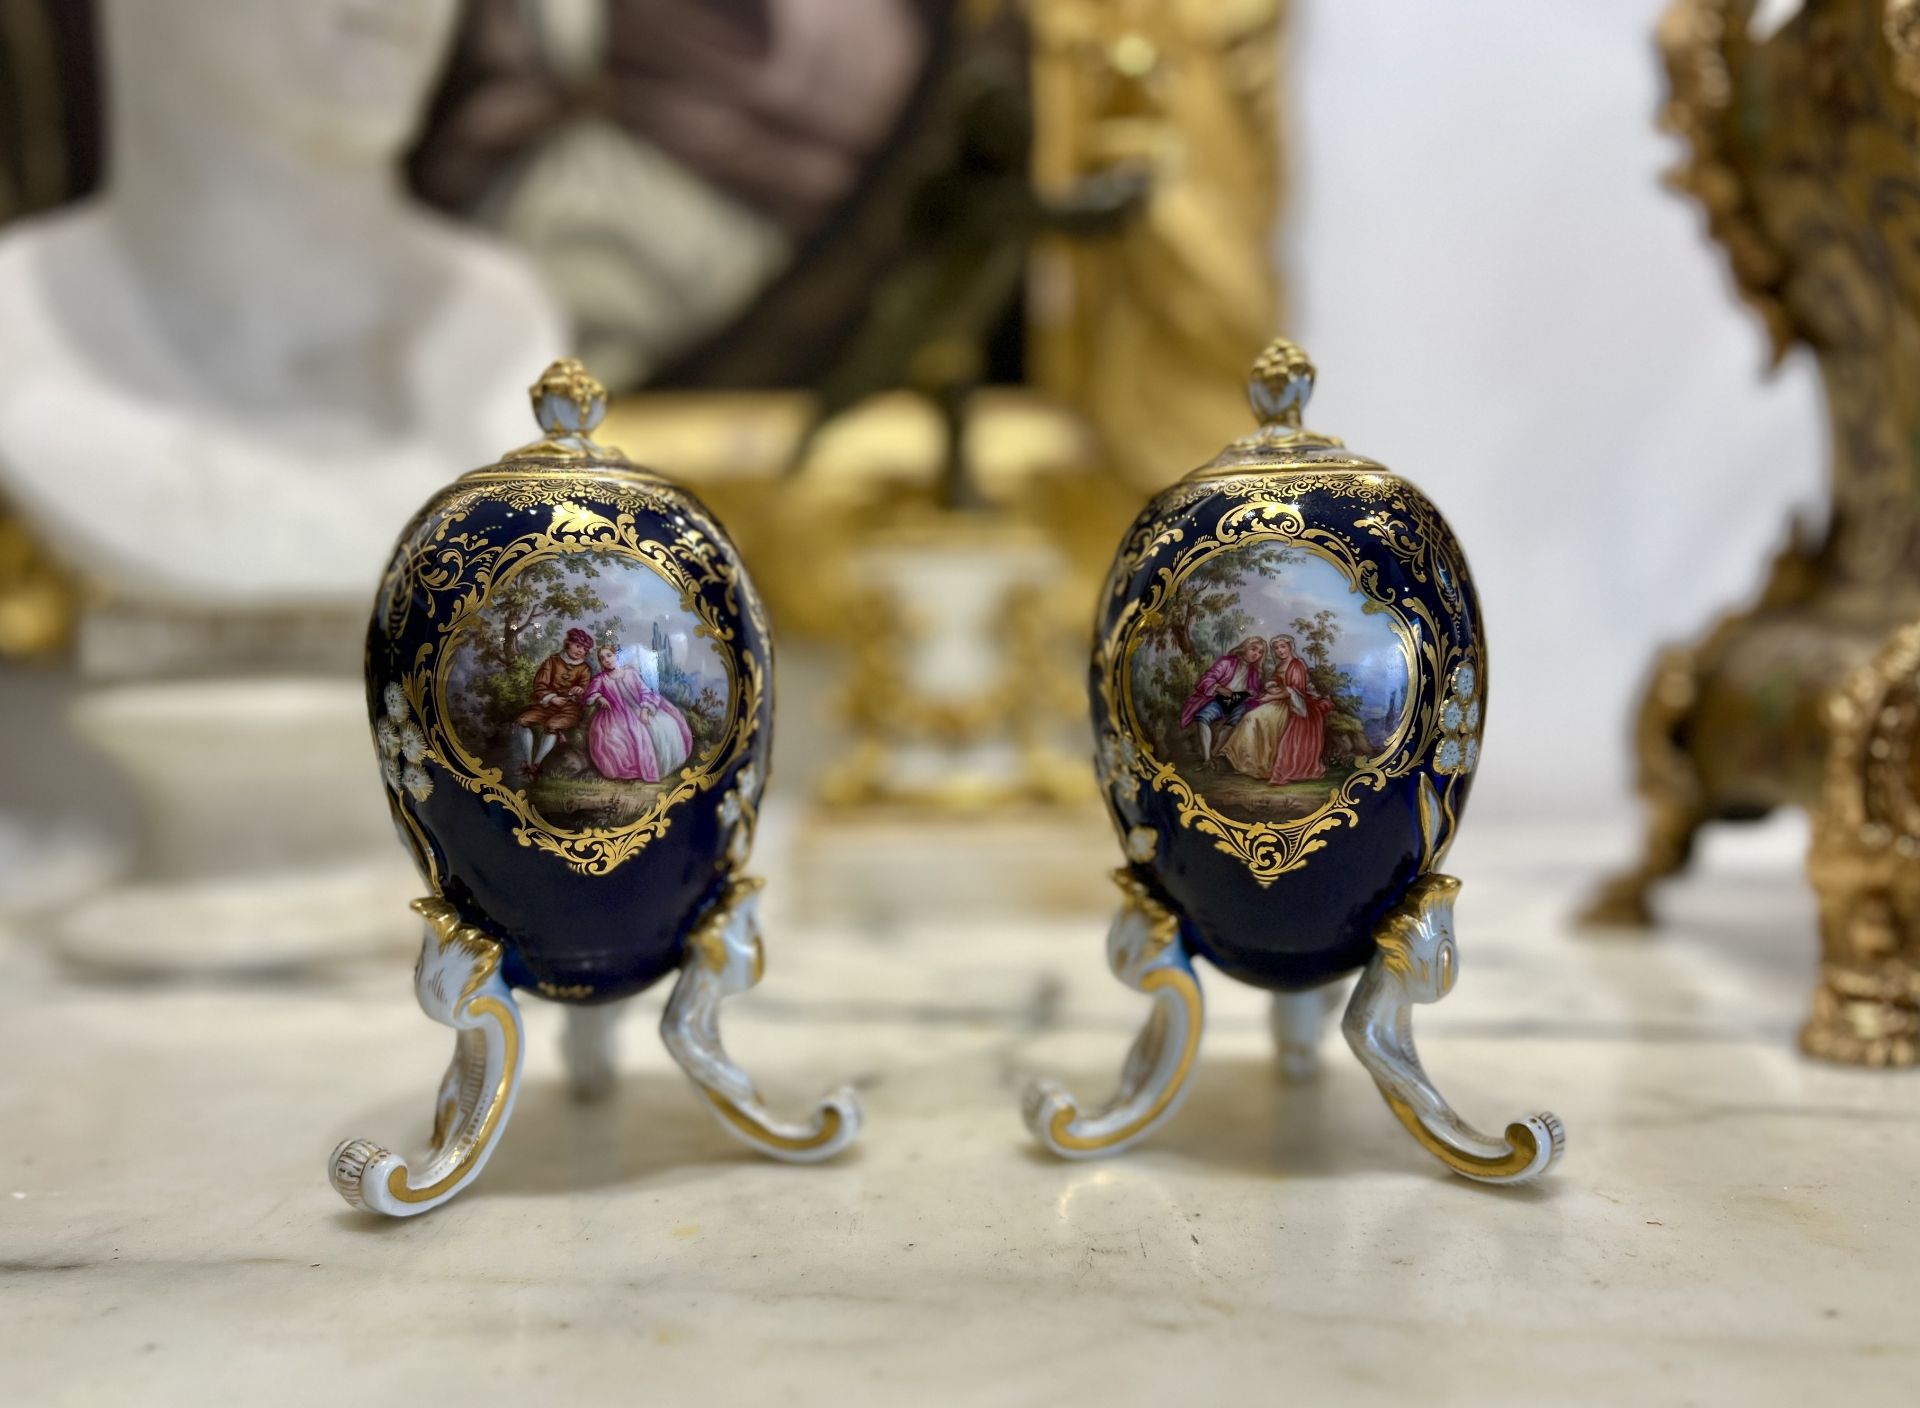 MEISSEN: A PAIR OF LATE 19TH / EARLY 20TH CENTURY PORCELAIN EGG SHAPED TEA CADDIES - Image 2 of 5